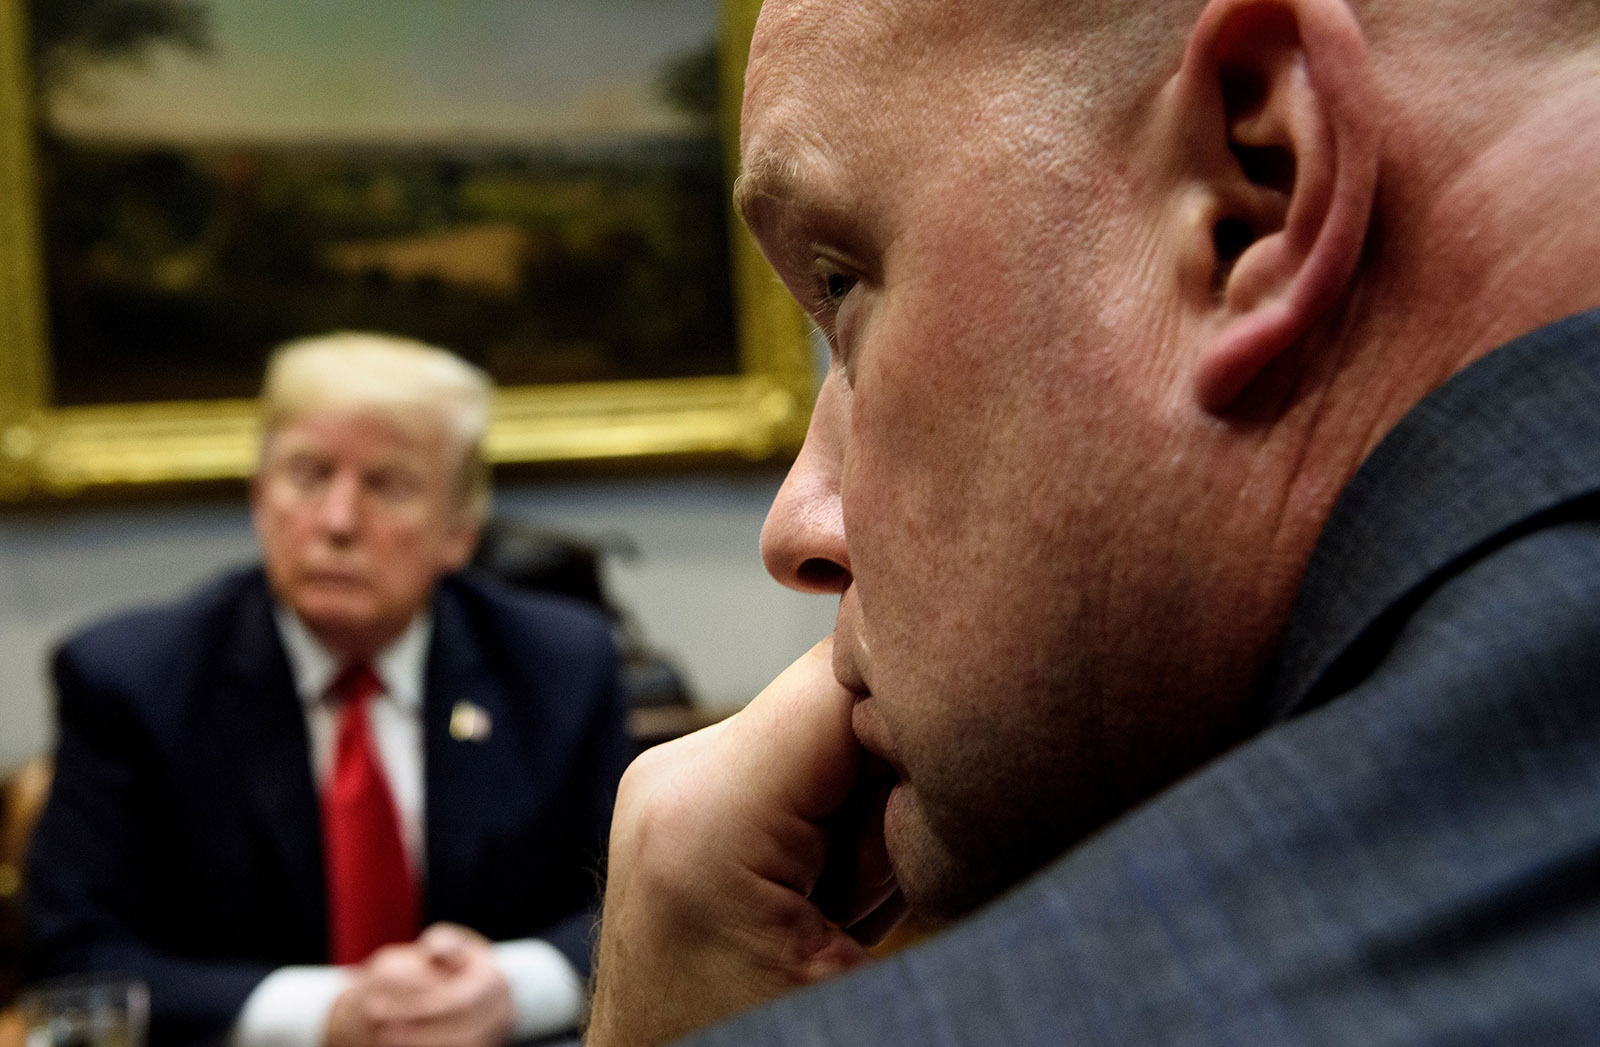 President Donald Trump and Acting Attorney General Matthew Whitaker at a meeting in the Roosevelt Room of the White House, December 18, 2018